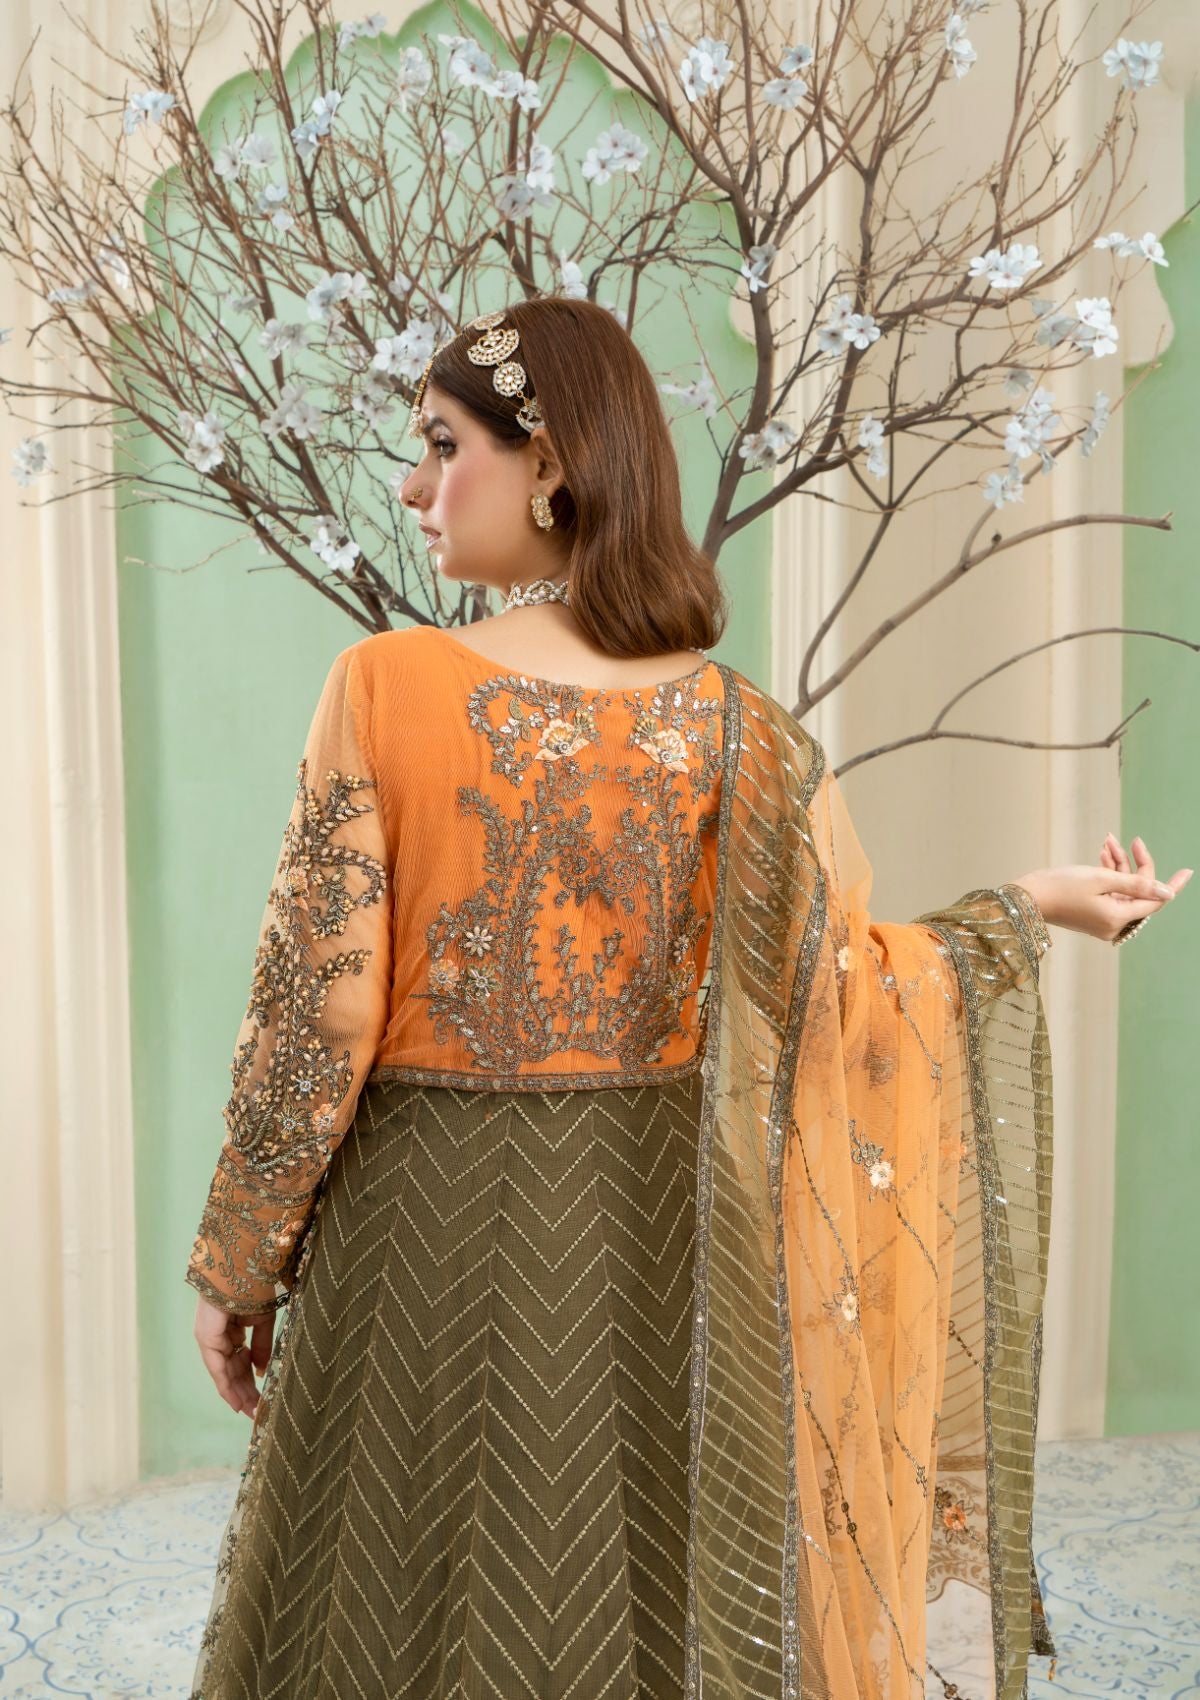 Formal Collection - AN By Badar Embroidery - Rang e Jahan - ALC#01 - Marvelous